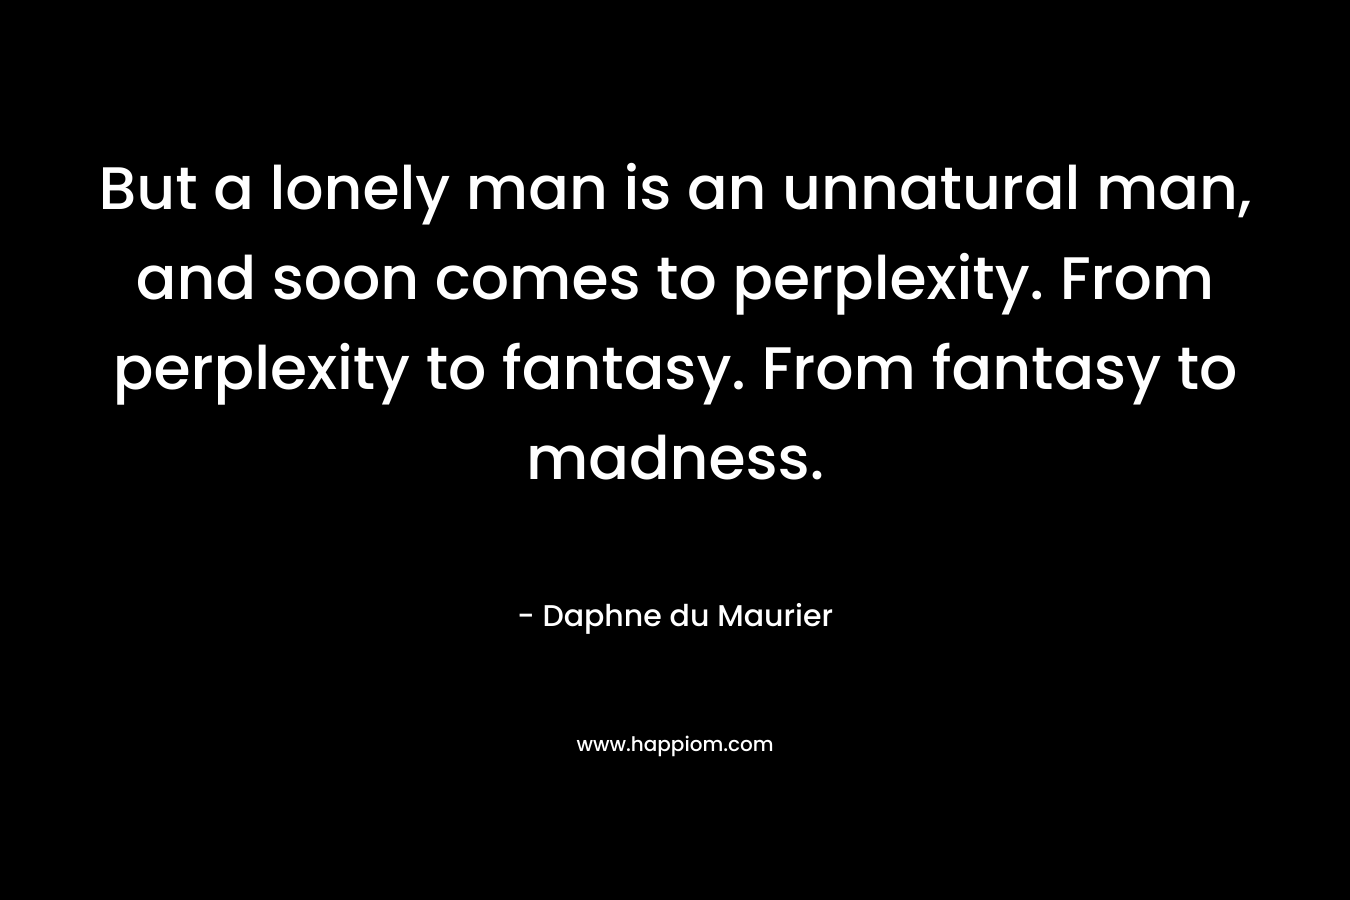 But a lonely man is an unnatural man, and soon comes to perplexity. From perplexity to fantasy. From fantasy to madness.